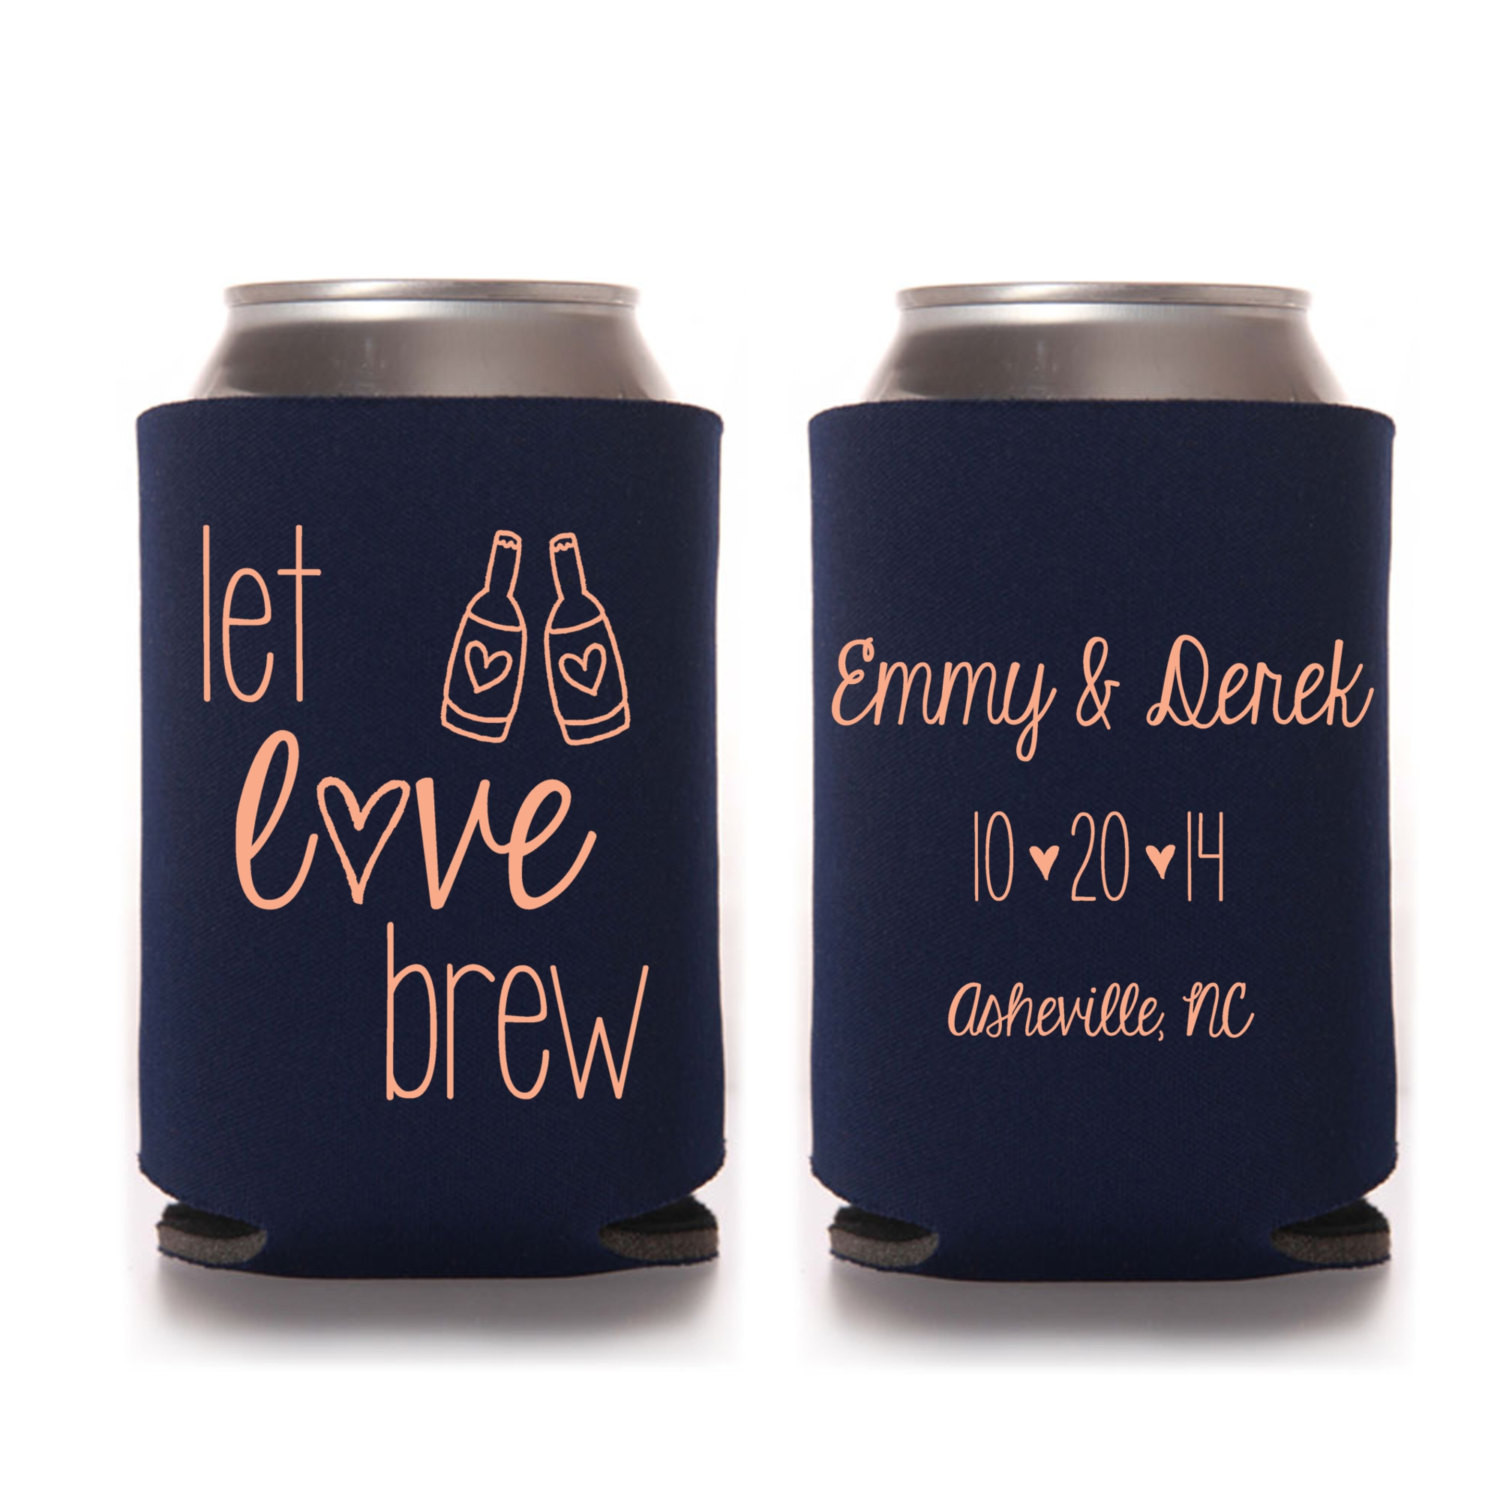 Koozie Wedding Favors
 Fall Wedding Favors for Guests Let Love Brew Personalized